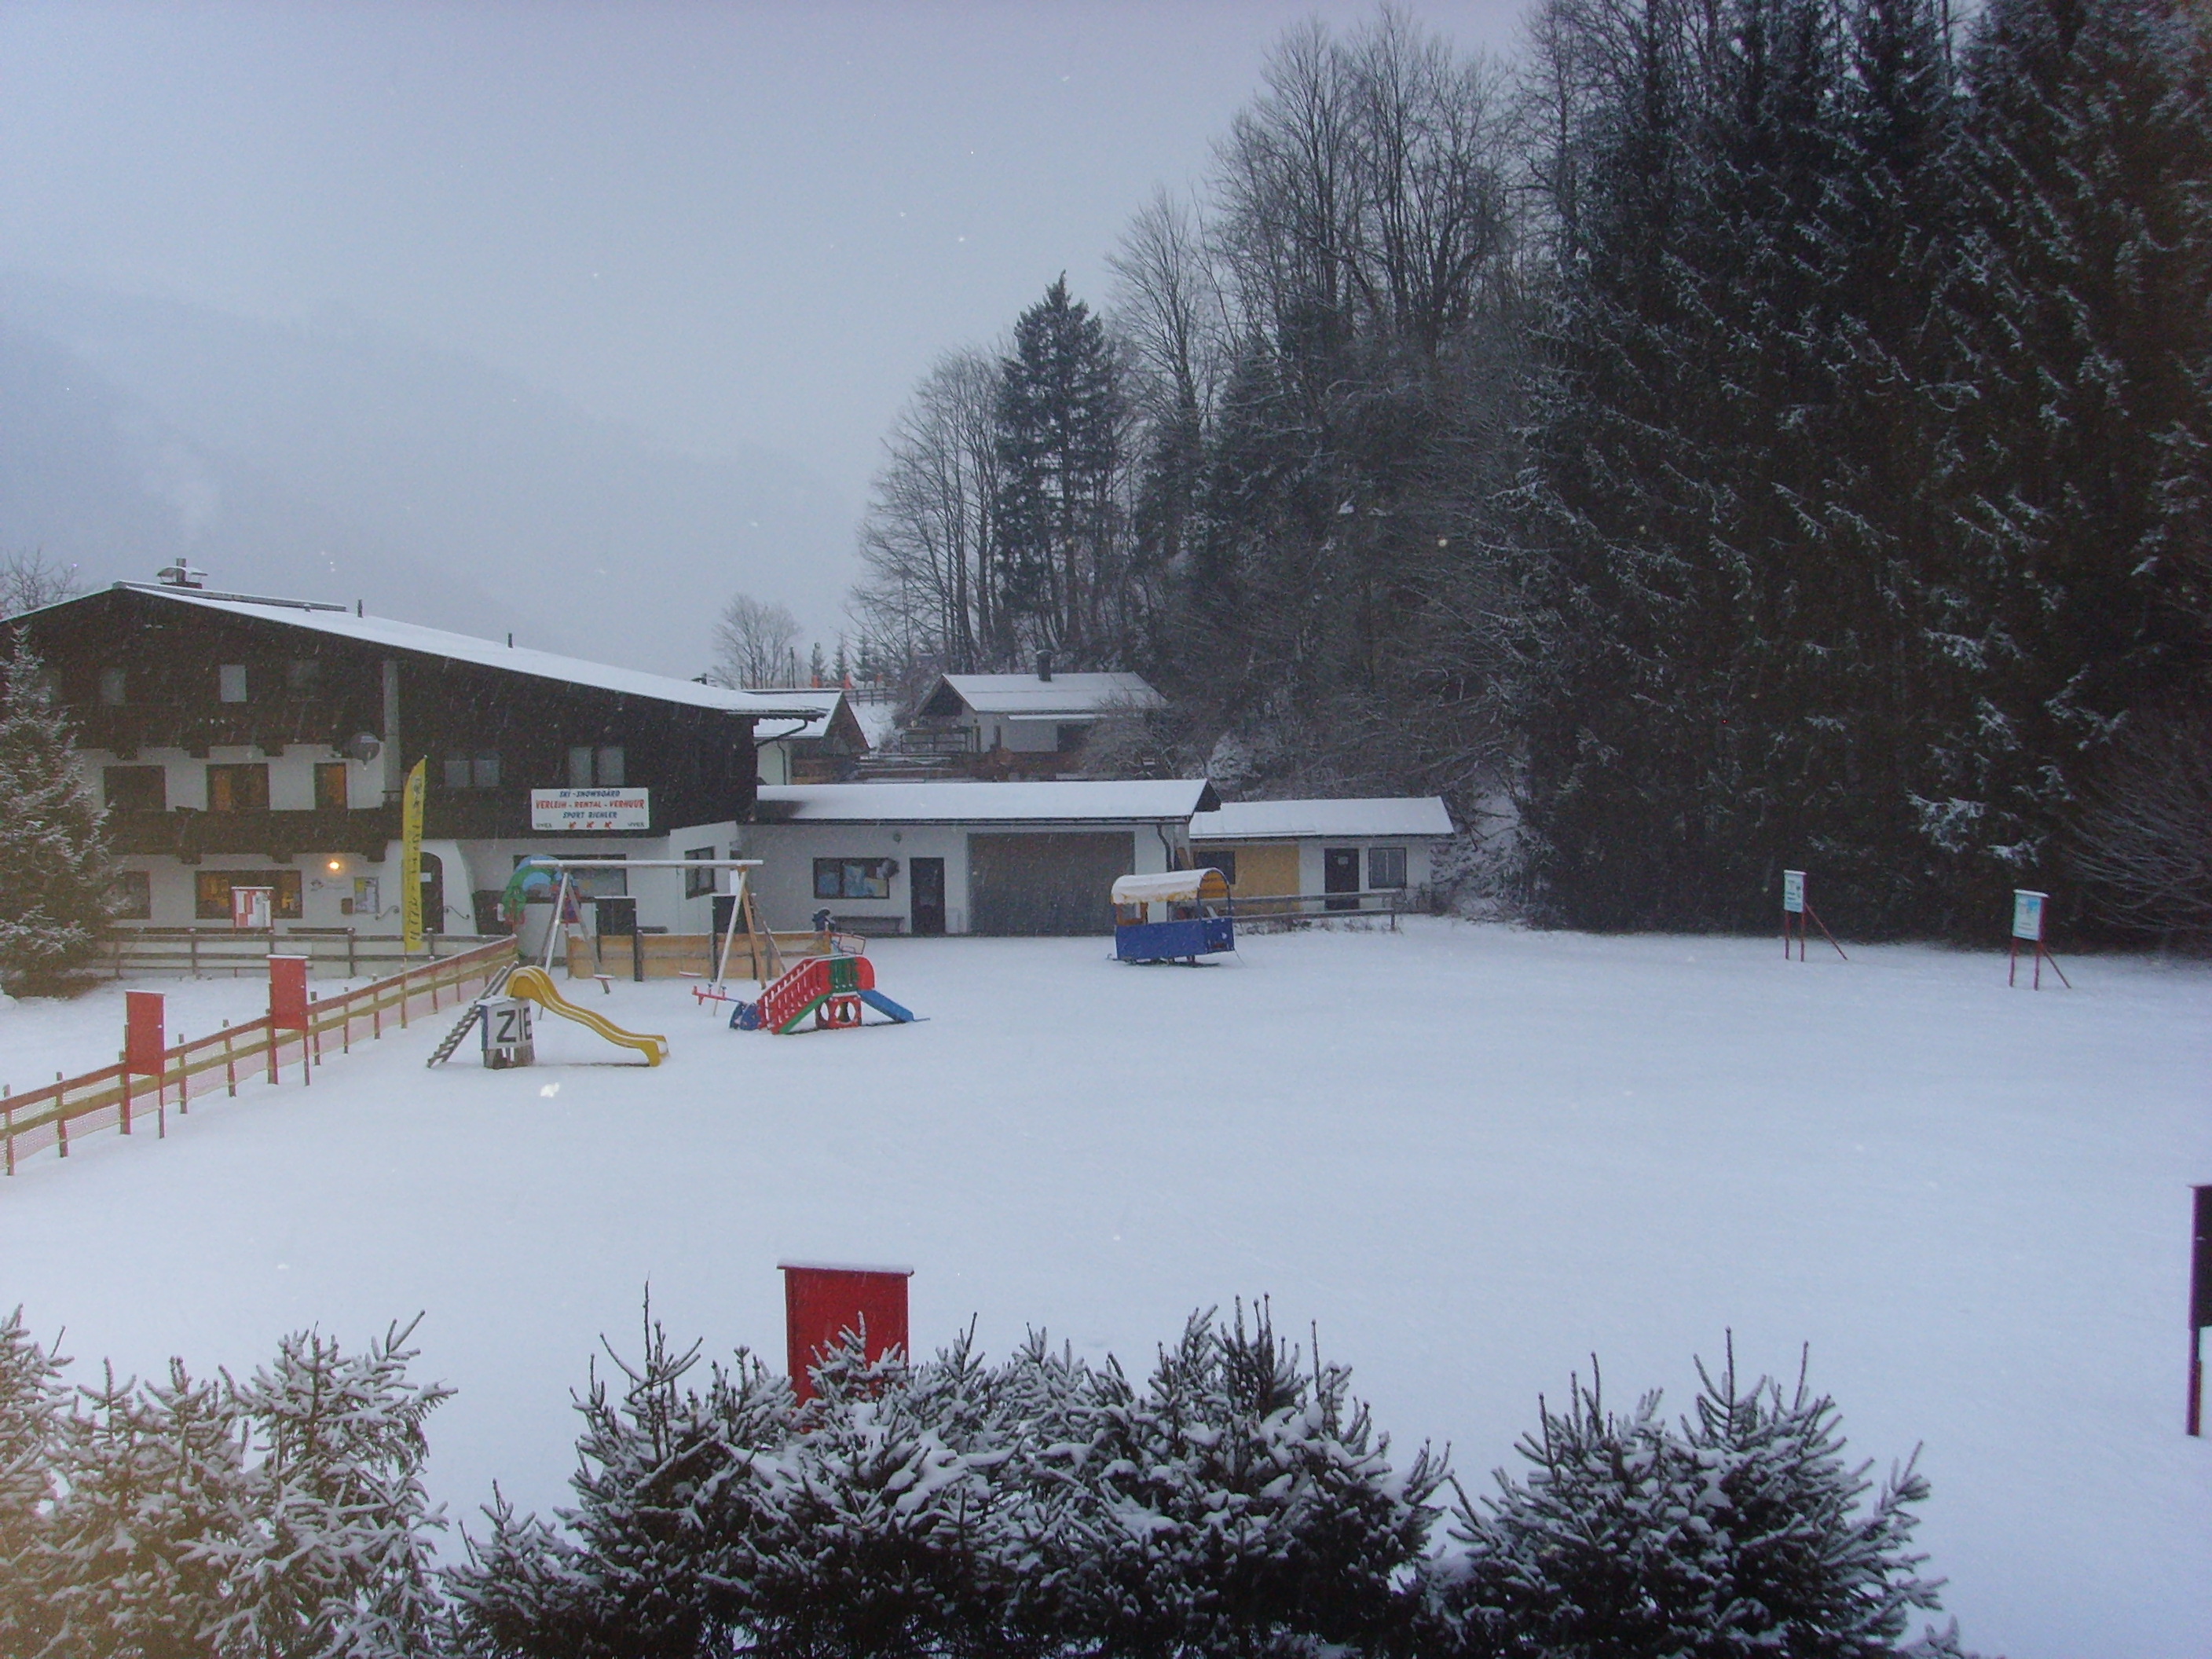 the childrens play area by the ski school total, Kirchdorf